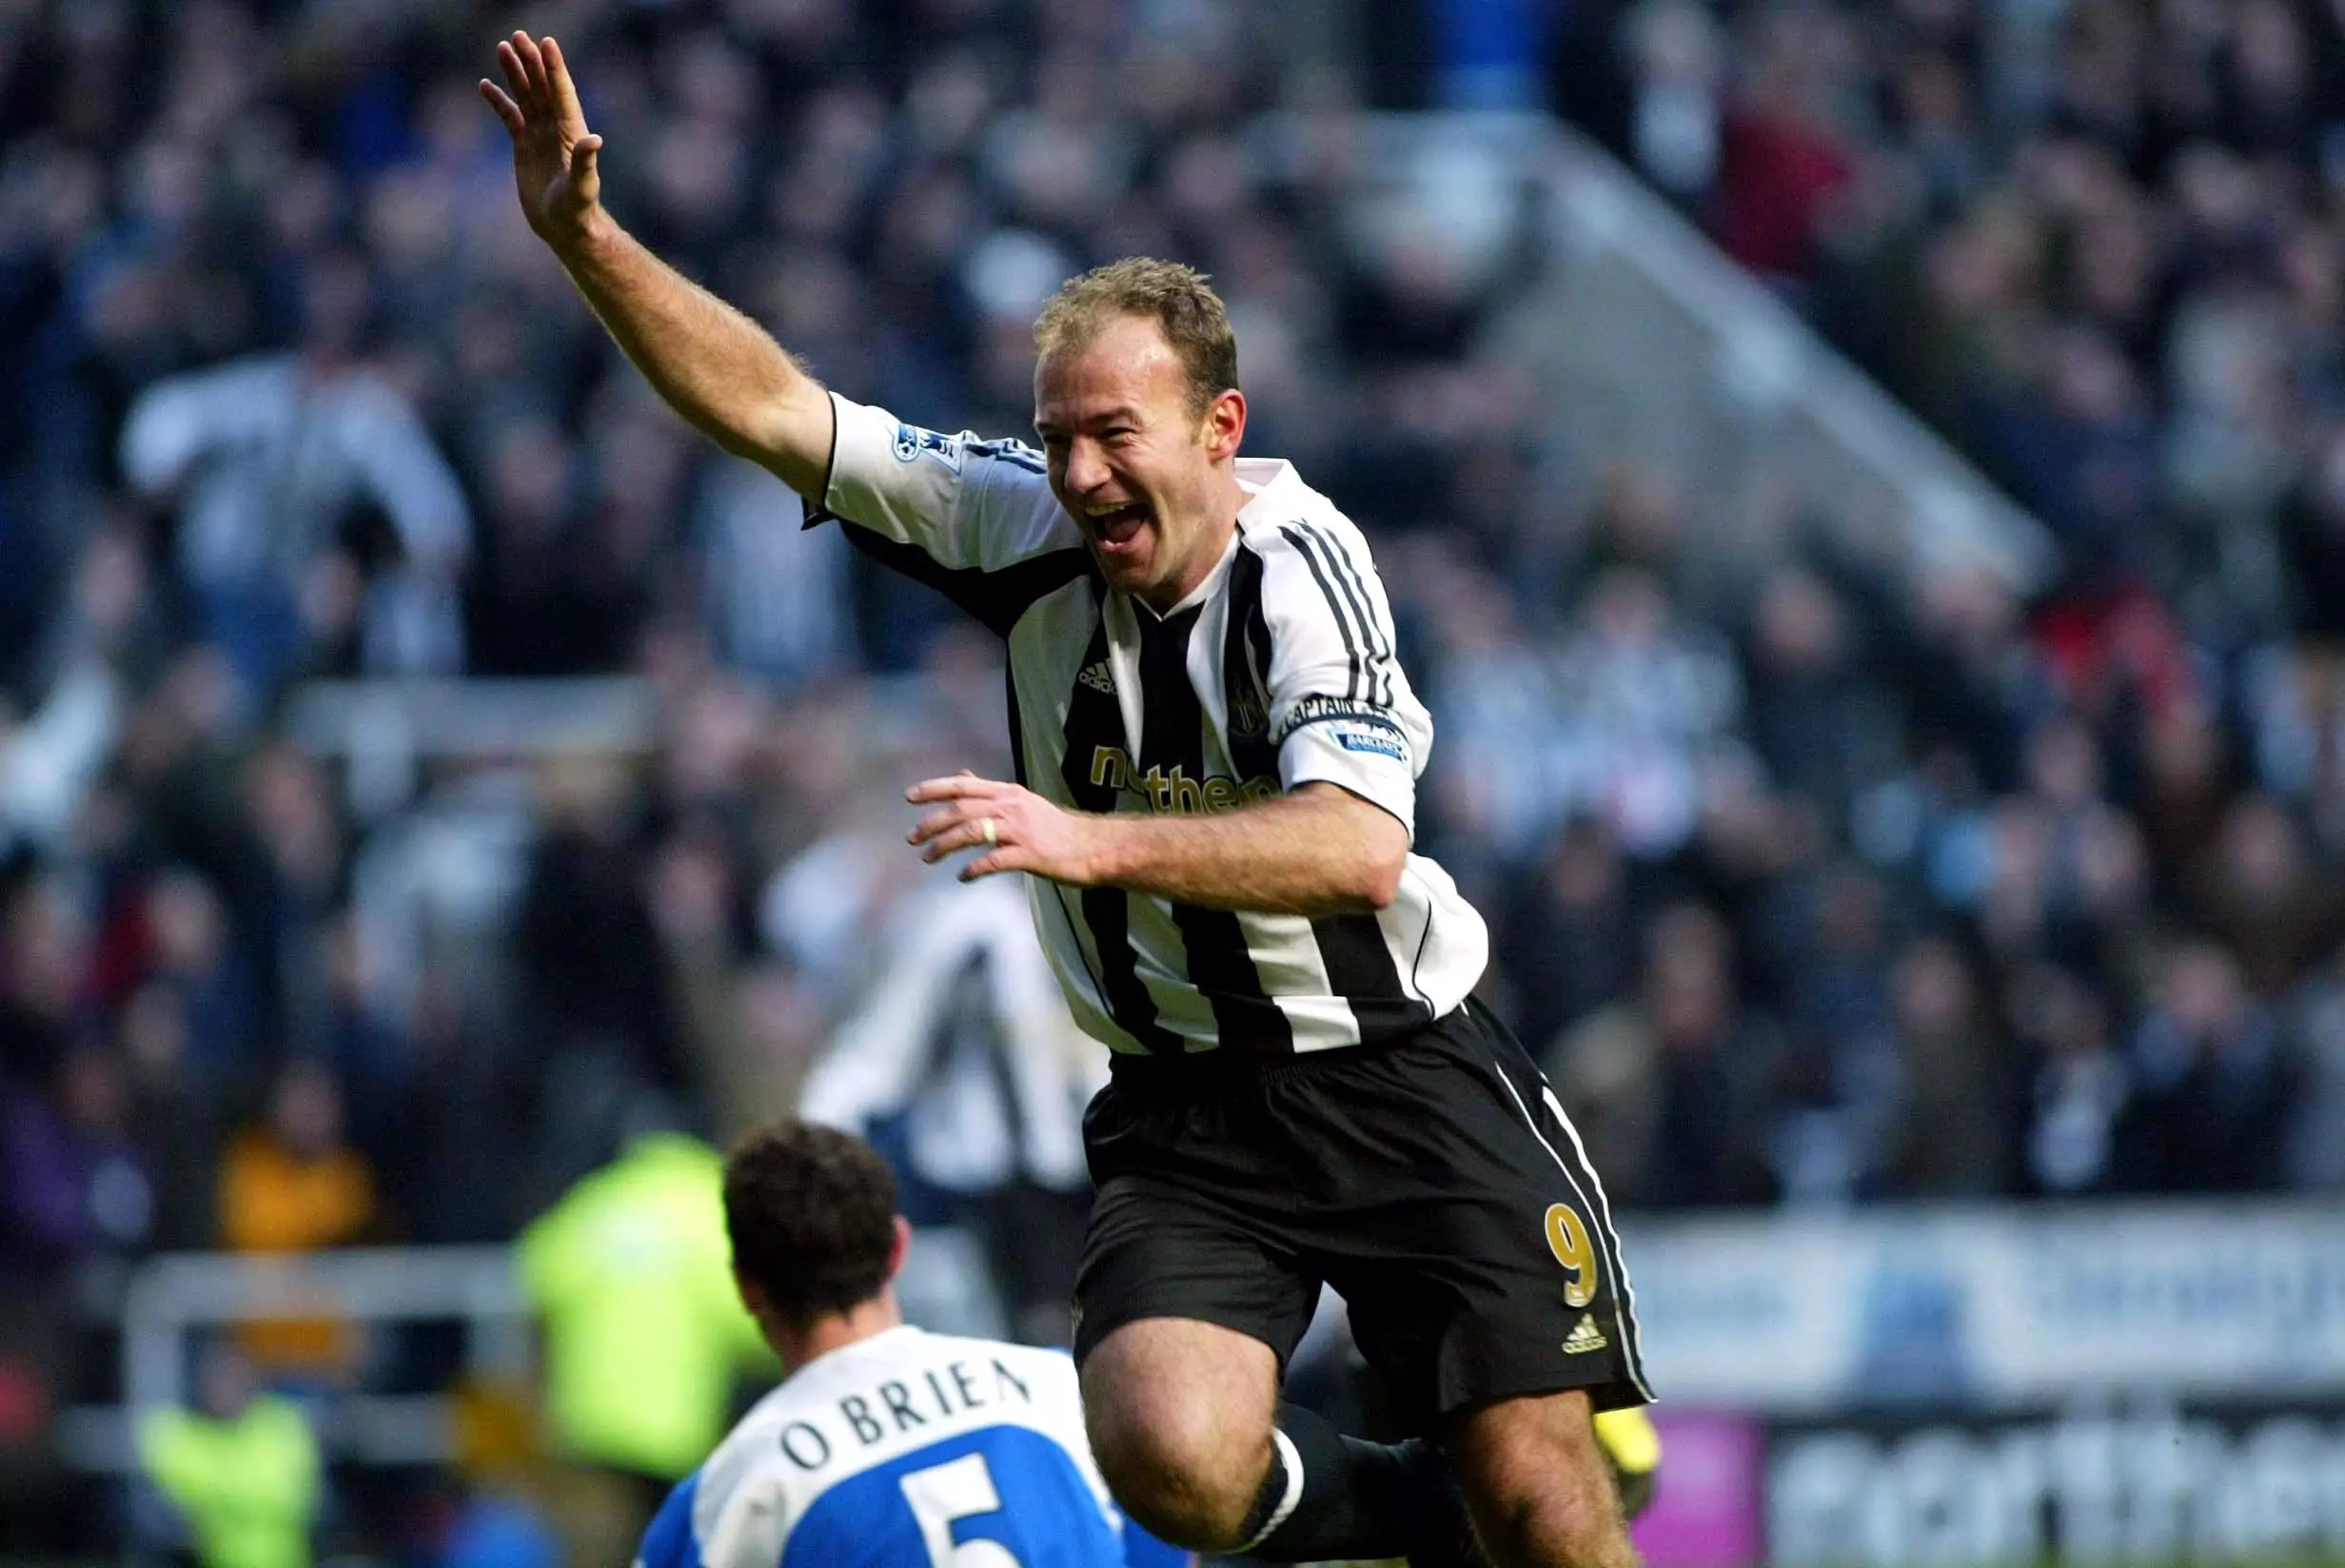 Shearer's armed raised celebration became iconic due to how often fans saw it. Image: PA Images